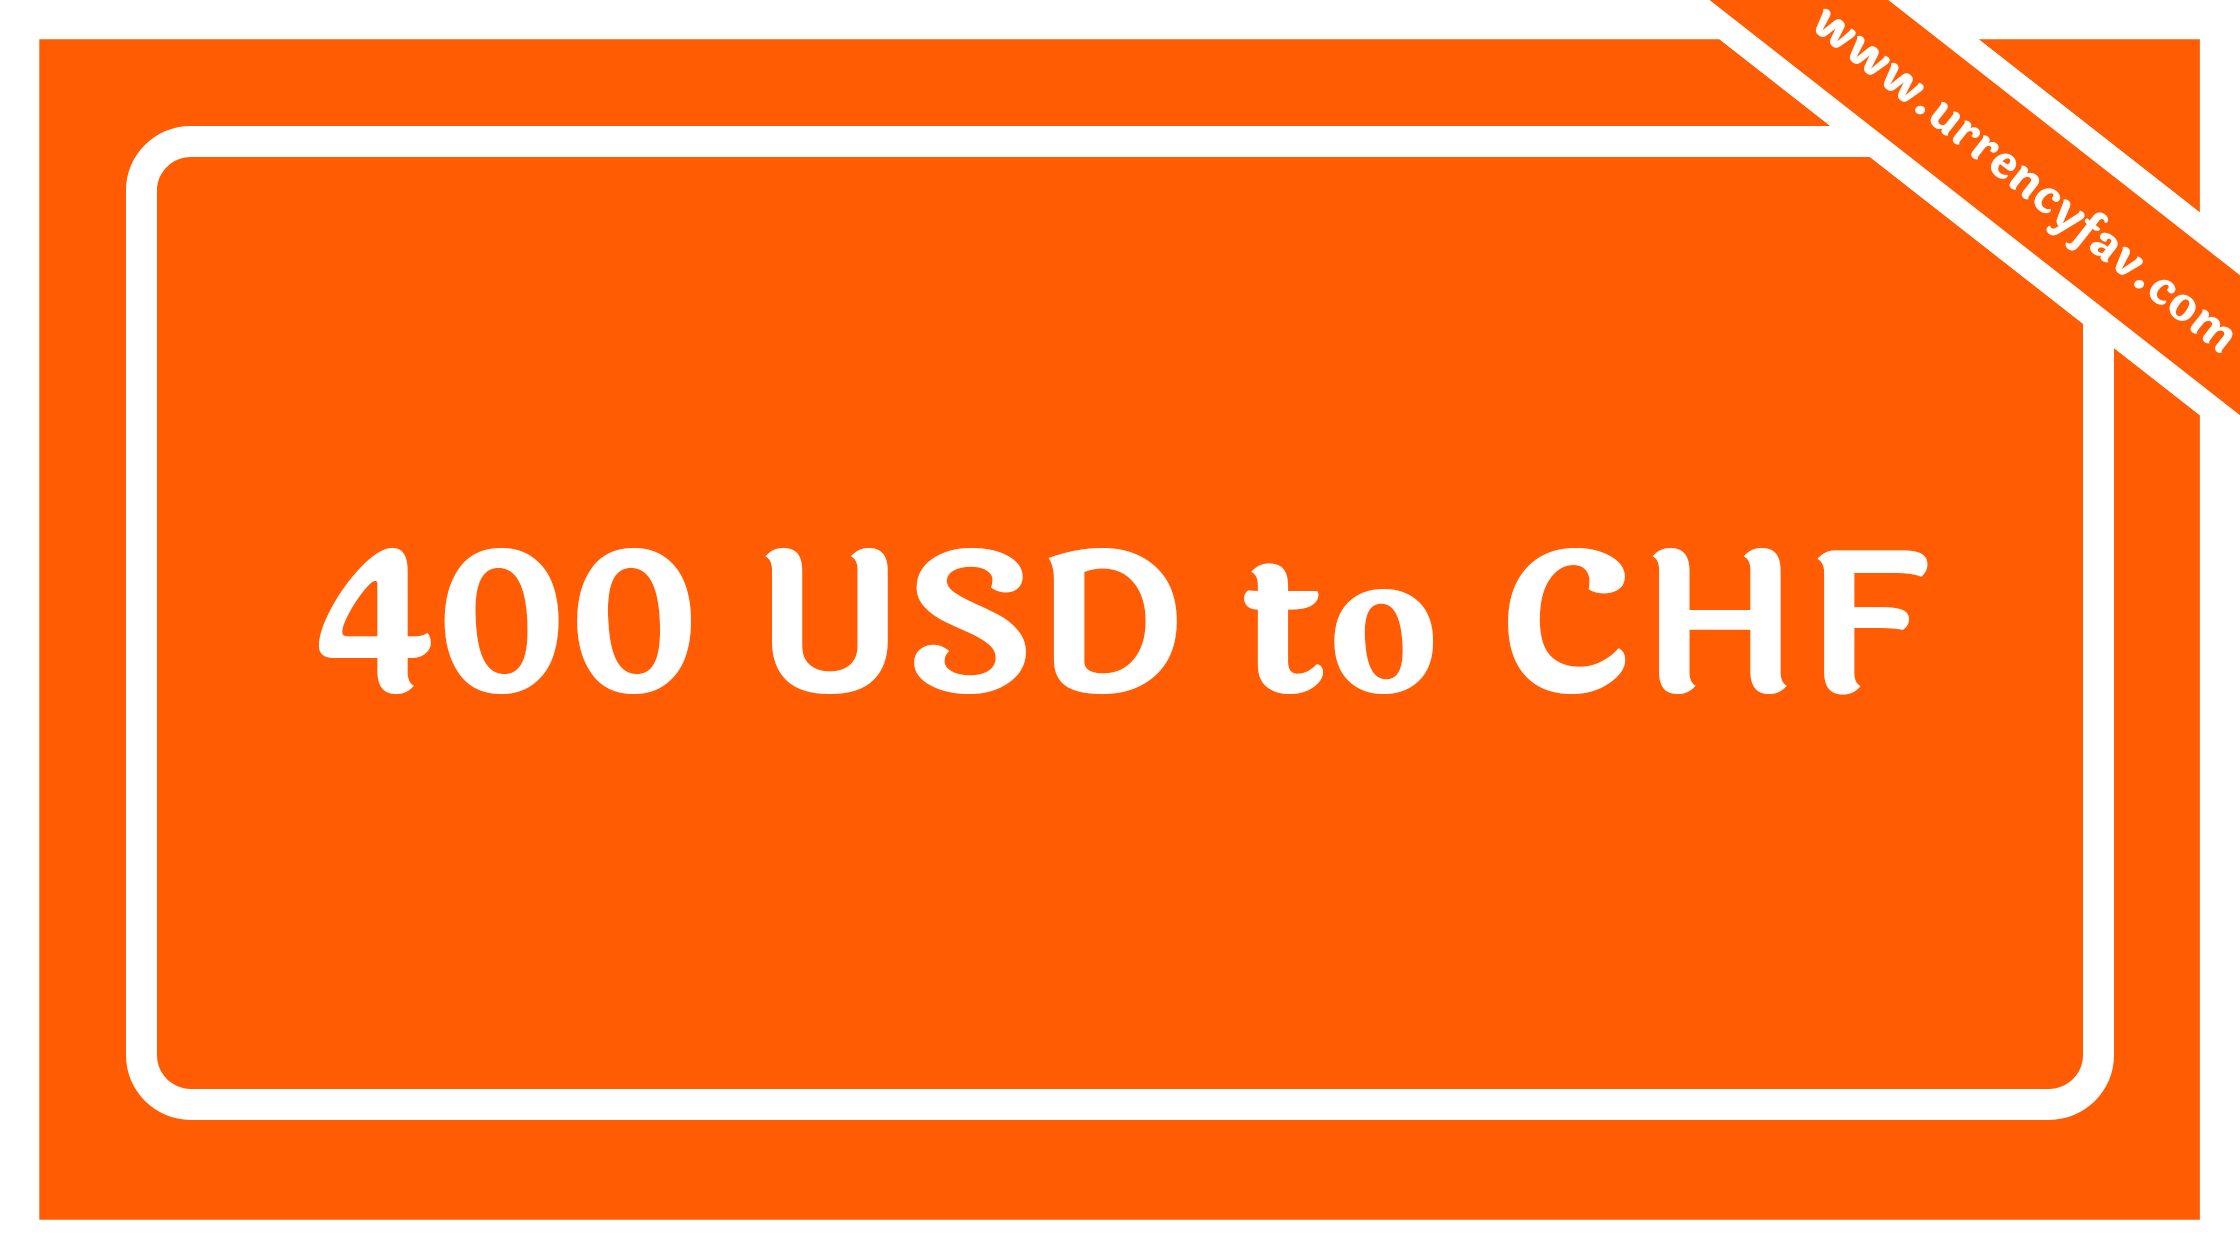 400 USD to CHF